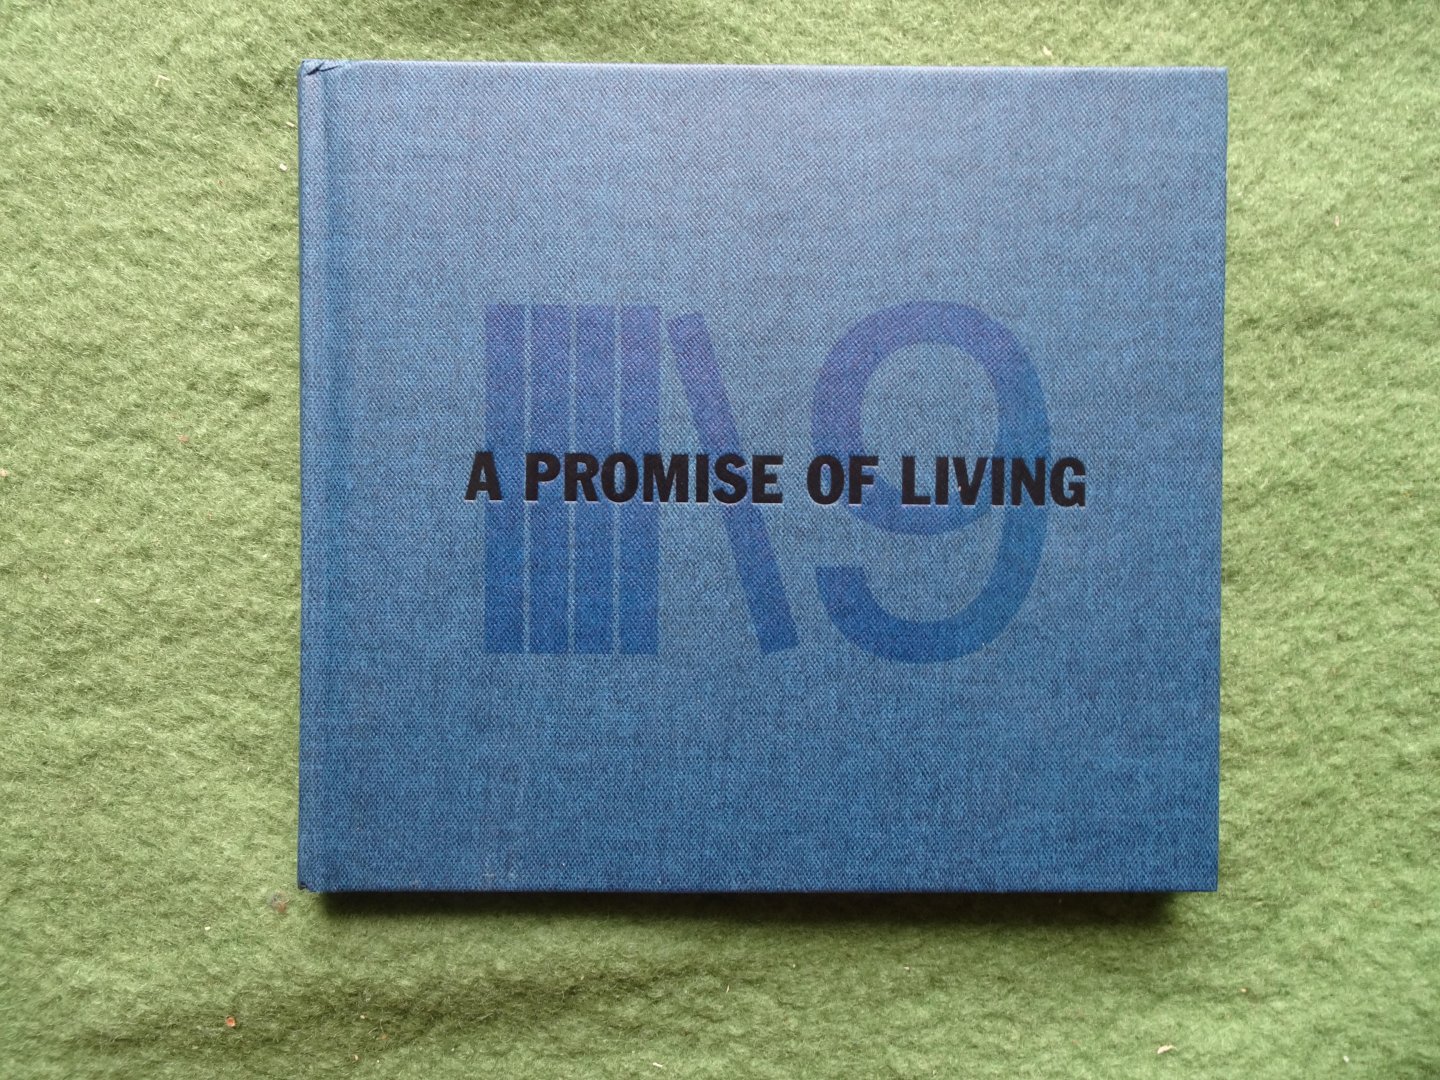 Allford Hall Monaghan Morris & Timothy Soar - A PROMISE OF LIVING